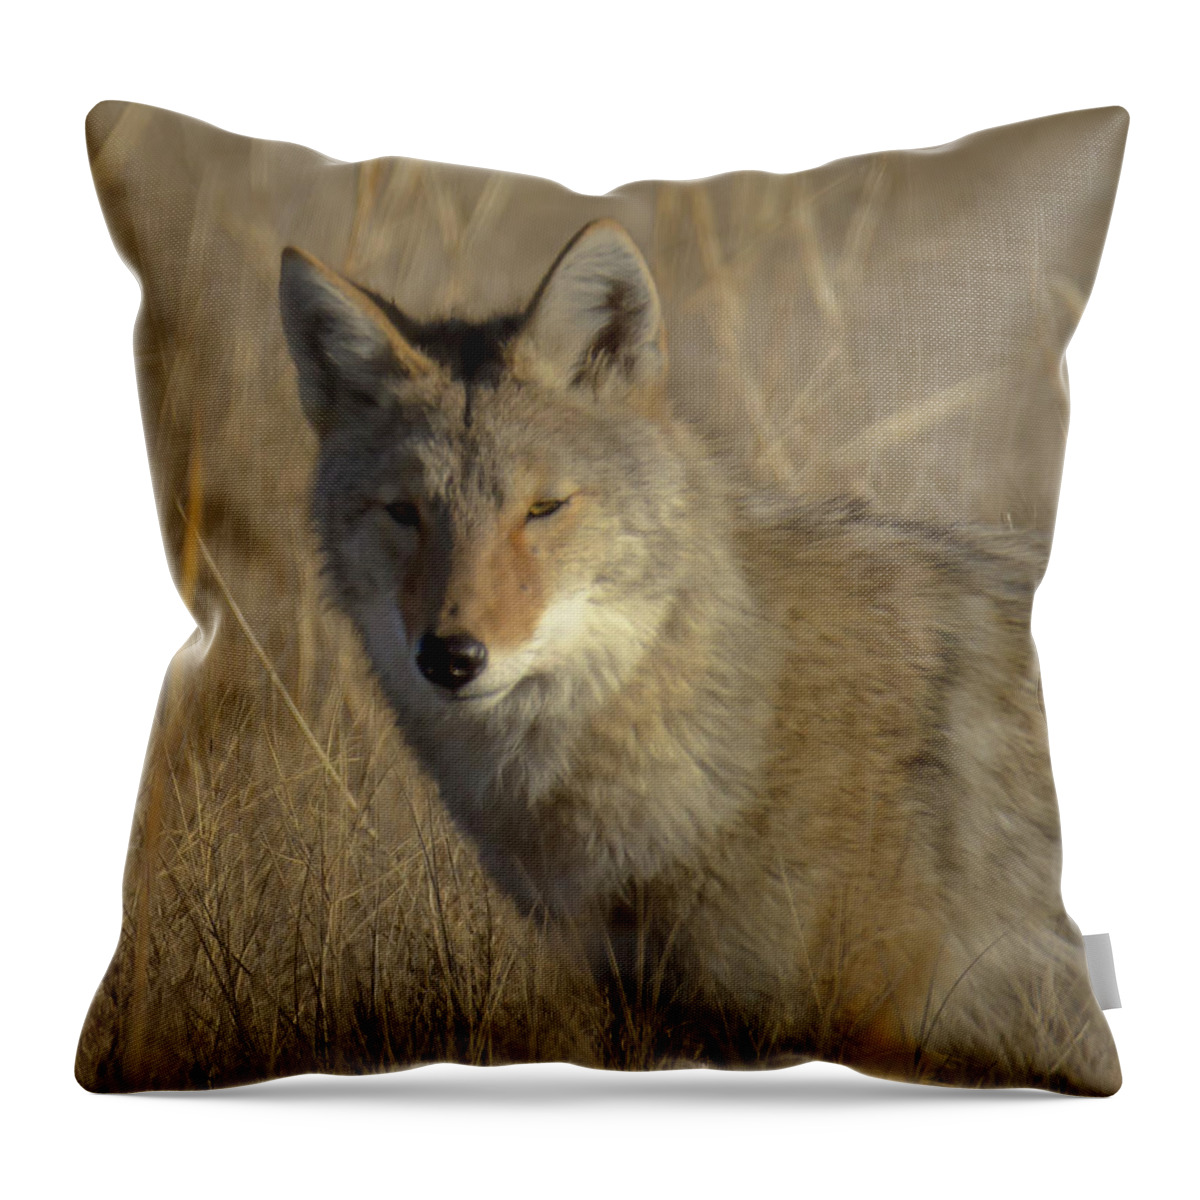 Nature Throw Pillow featuring the photograph Cunning by Steve Marler